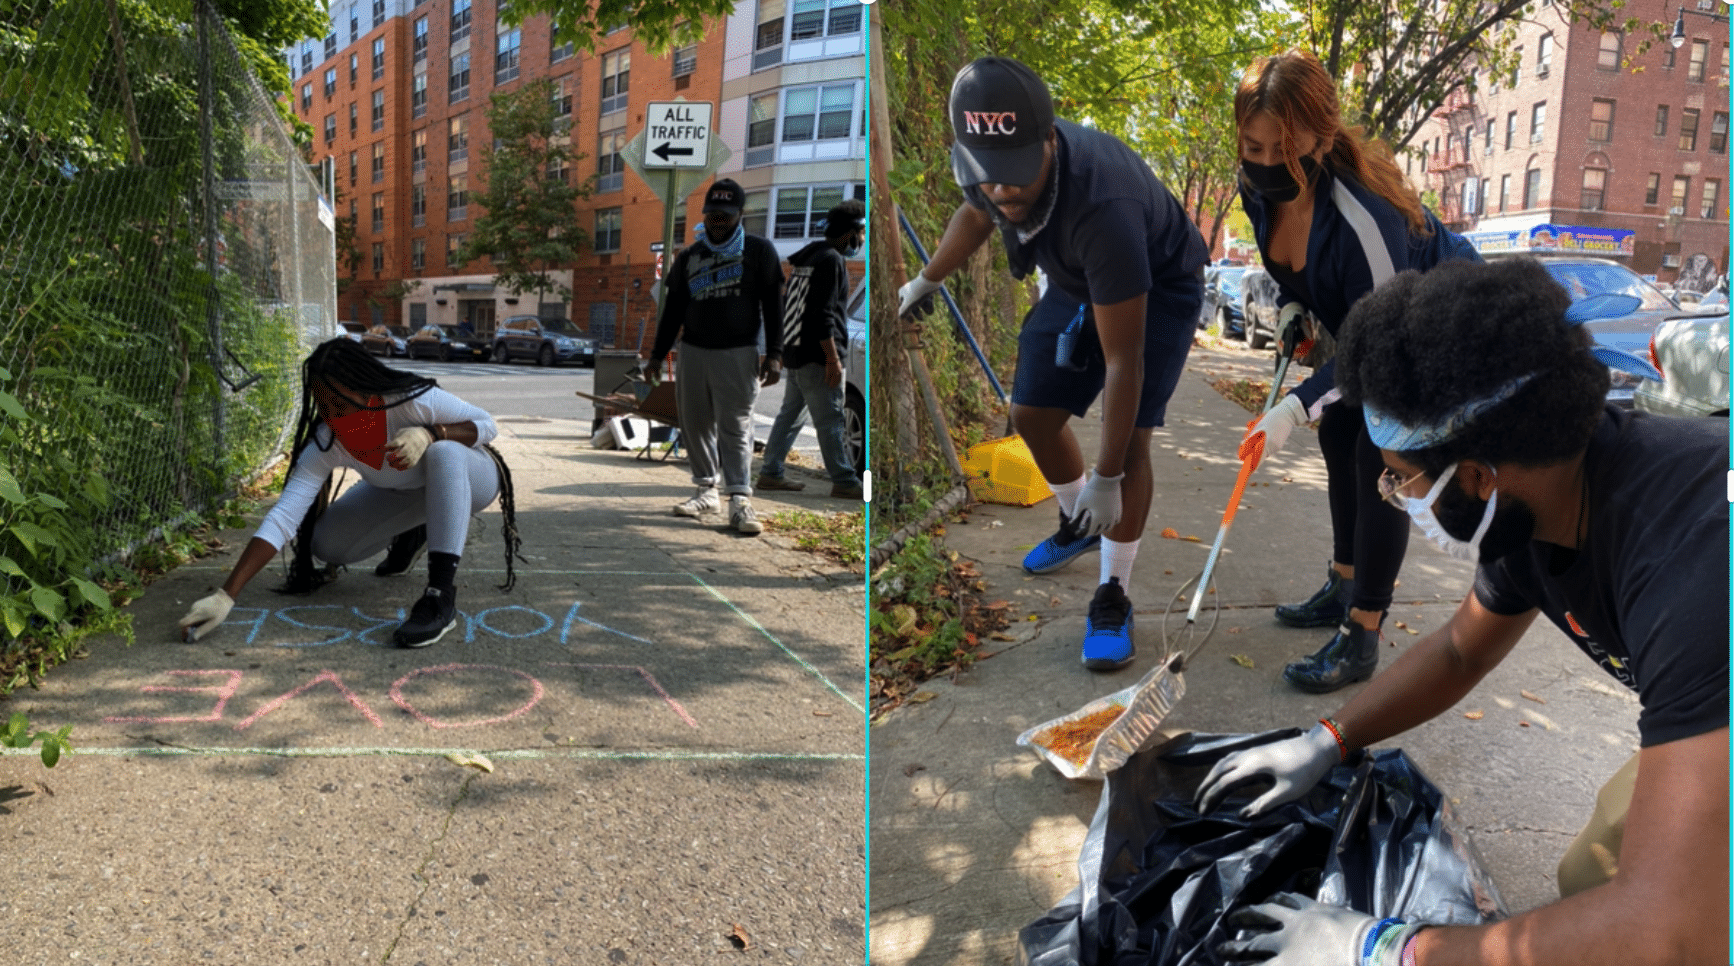 Photo on the left - a woman squats down to pull out some weeds in a sidewalk crack. A couple of people are seen in the background. She's beside a fence and a city street is also seen in the background. Photo on the right - two men and one women are cleaning up a sidewalk. One man is somewhat bent over holding a trash bag. The woman uses a tool to pick up a discarded aluminum pan with food in it. The third man is in the process of bending down to help pick up the pan to put in the trash bag. 